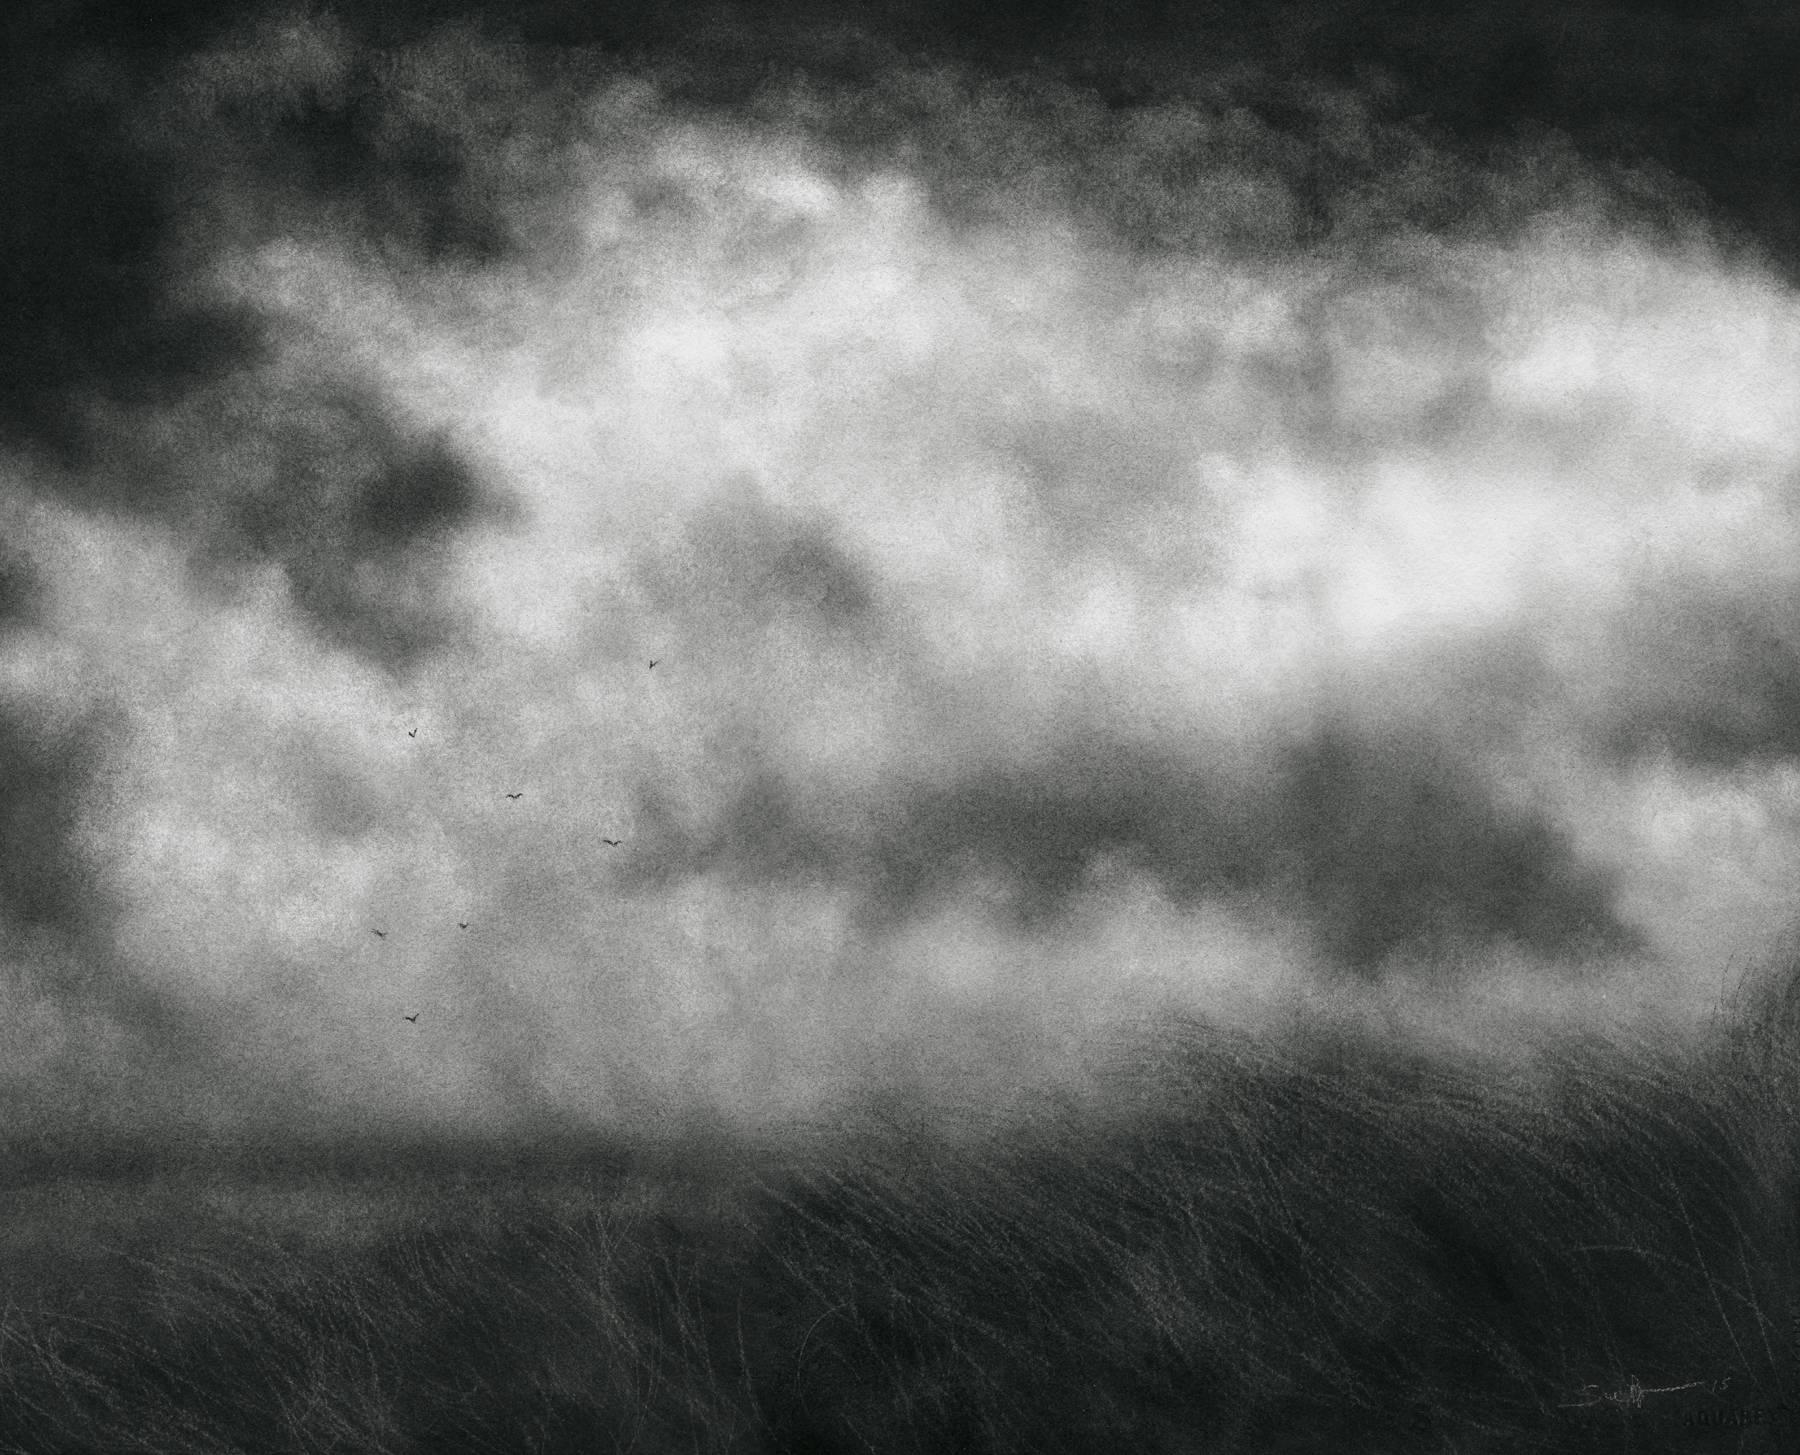 Beneath the Heavy Sky (Black & White Charcoal Landscape Drawing of Field & Sky)